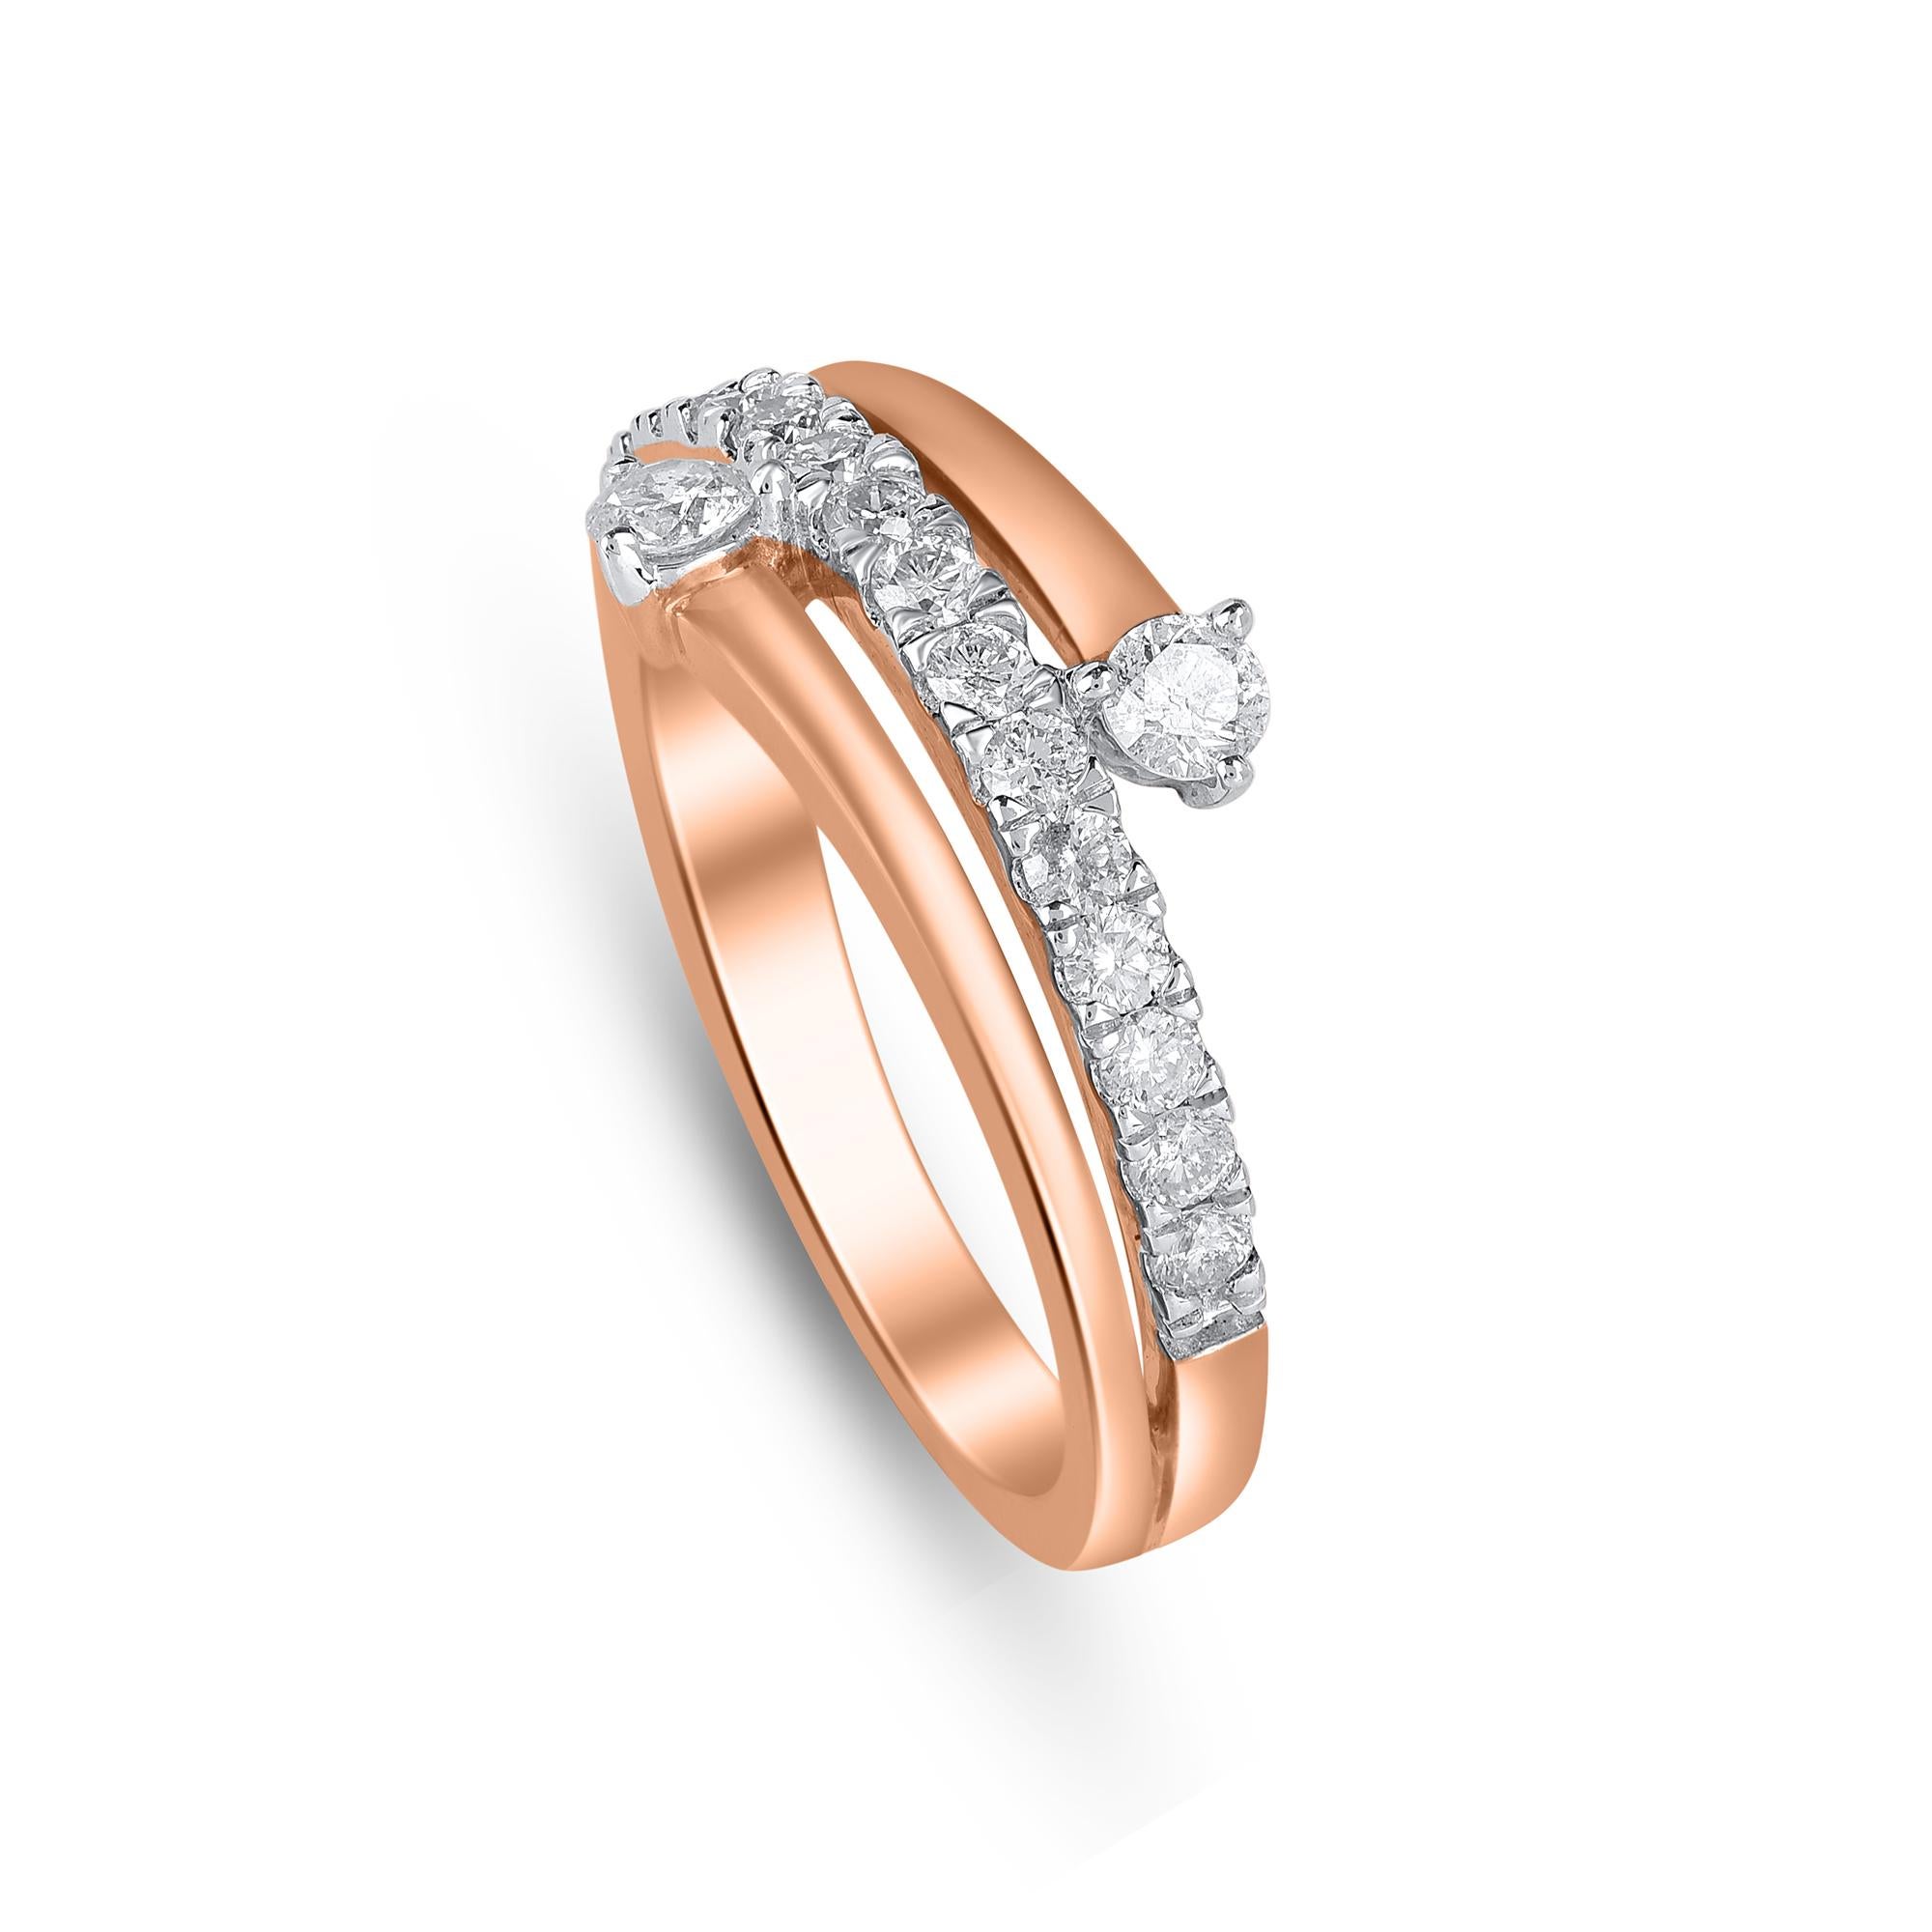 A modern makeover for a classic accessory, this diamond studded band glitters with 17 round diamonds in micro-prong setting. This diamond band is crafted in 18 kt rose gold.  Diamonds are graded JK color, I3 clarity. 